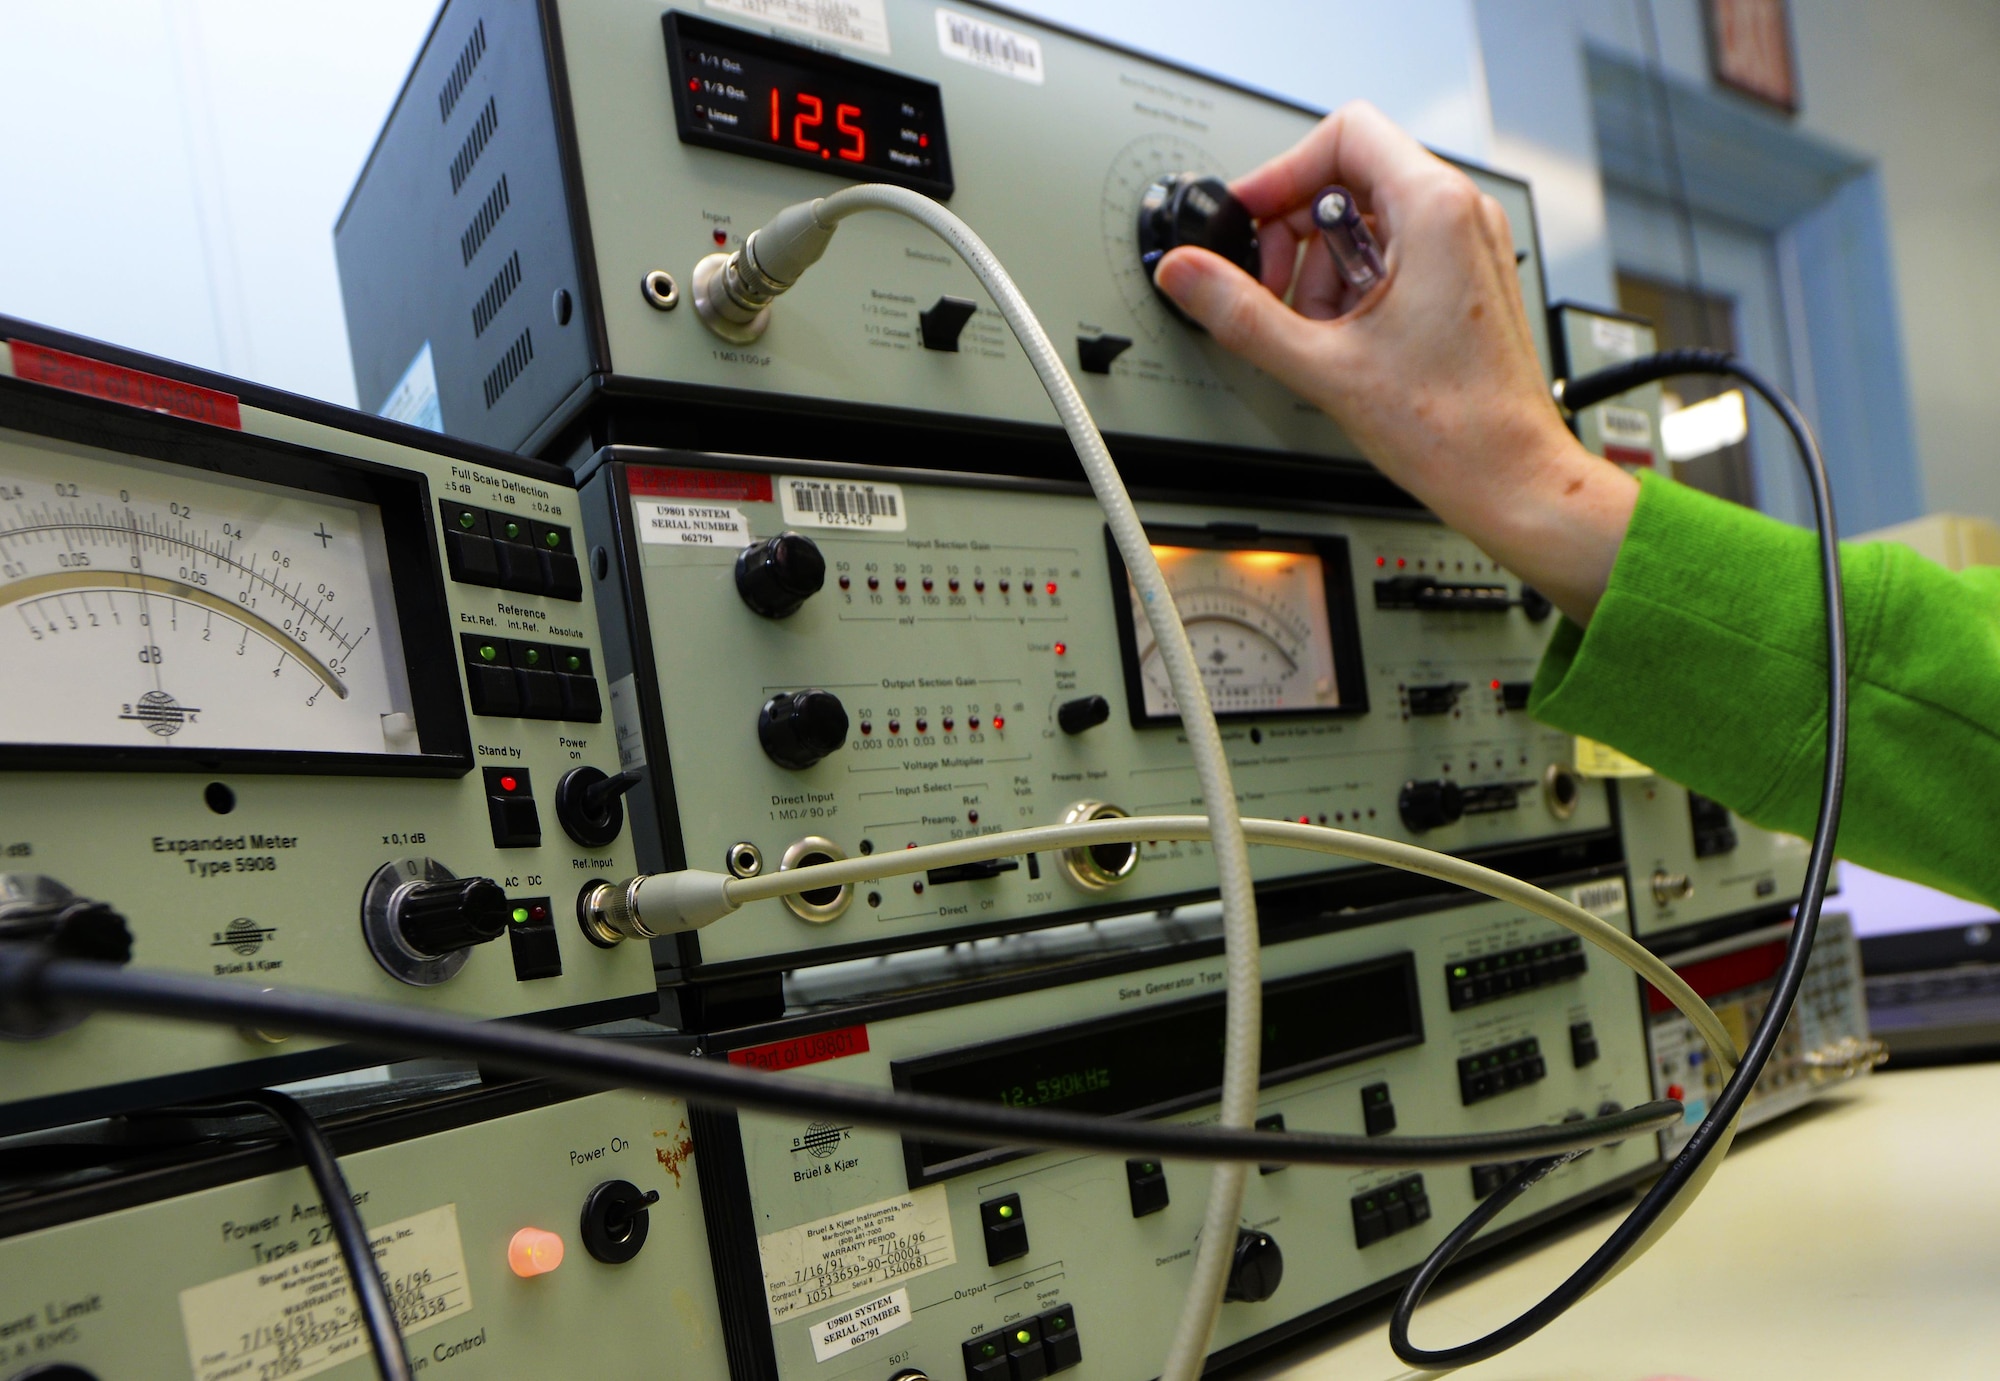 Elizabeth Maschmeyer, 3rd Maintenance Squadron Precision Measurement Equipment Laboratory calibration technician, calibrates a sound system at Joint Base Elmendorf-Richardson, Alaska, Oct. 23, 2017. Technicians from the 3rd MXS PMEL can calibrate and repair Test Measurement and Diagnostic Equipment to accuracies ranging from millionths of an inch to microvolts, depending upon the measurement area. They do so with four criteria in mind: accuracy, reliability, traceability and safety. (U.S. Air Force photo/Senior Airman Curt Beach)